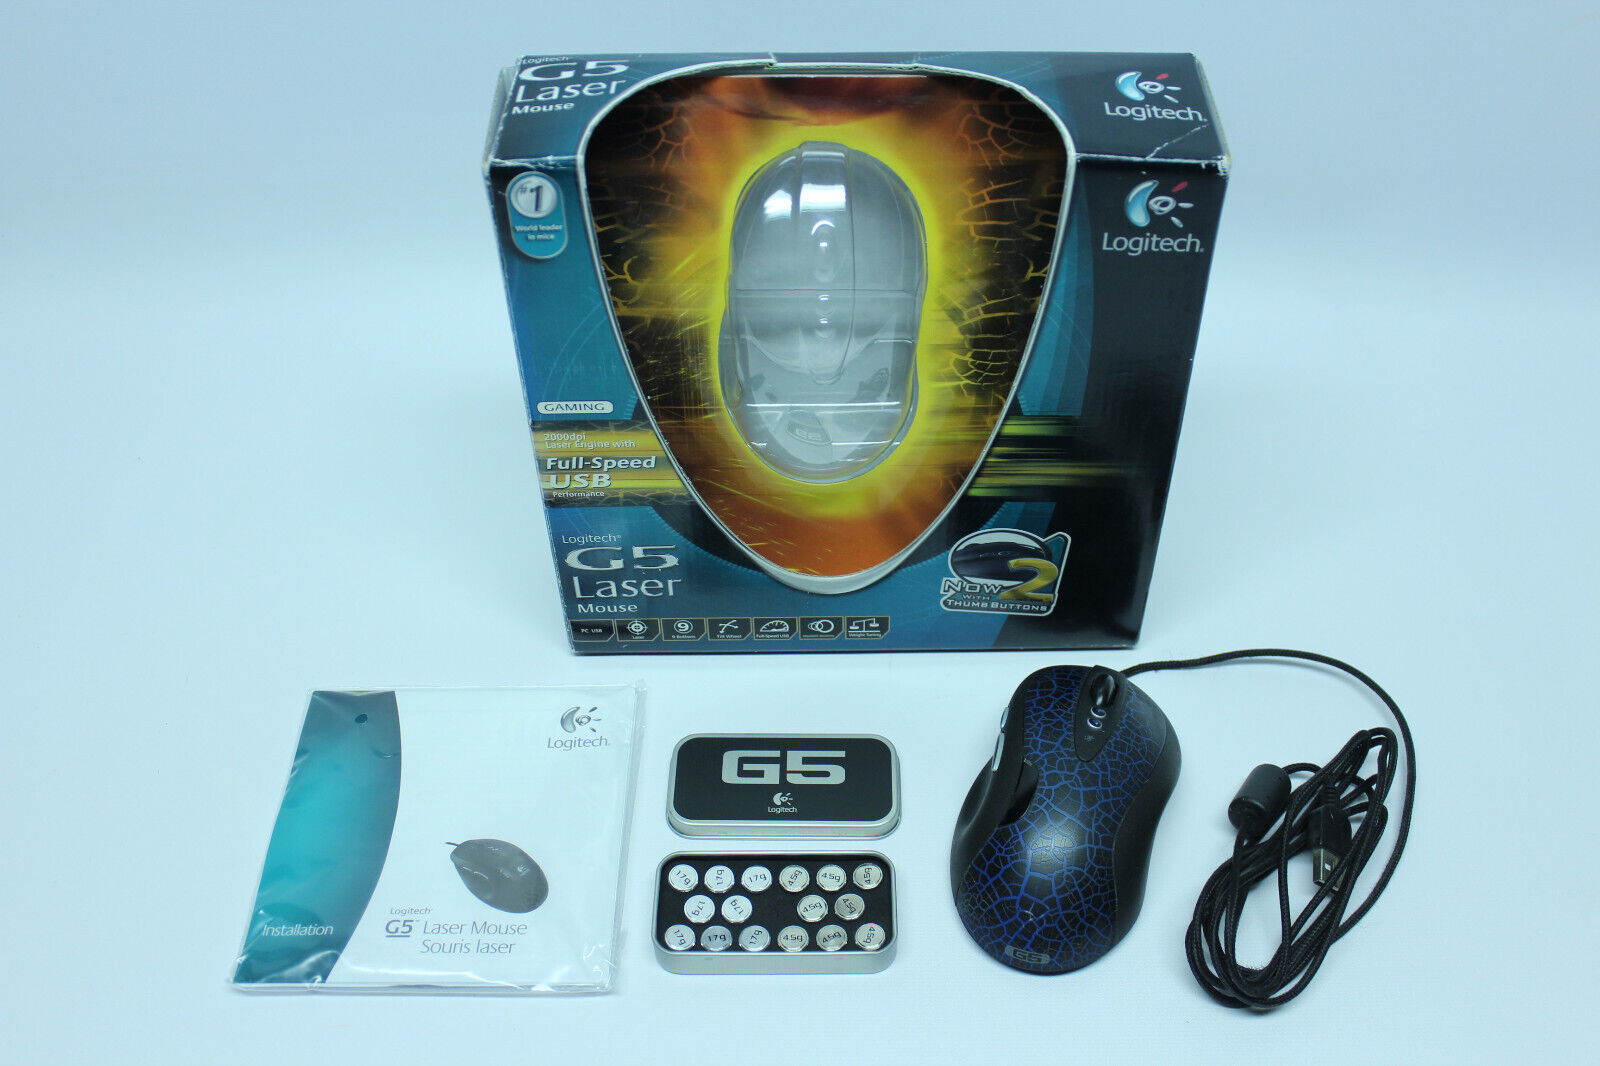 Logitech G5 Laser Gaming Mouse 2000dpi USB Complete in Box w/ Adjustable Weights